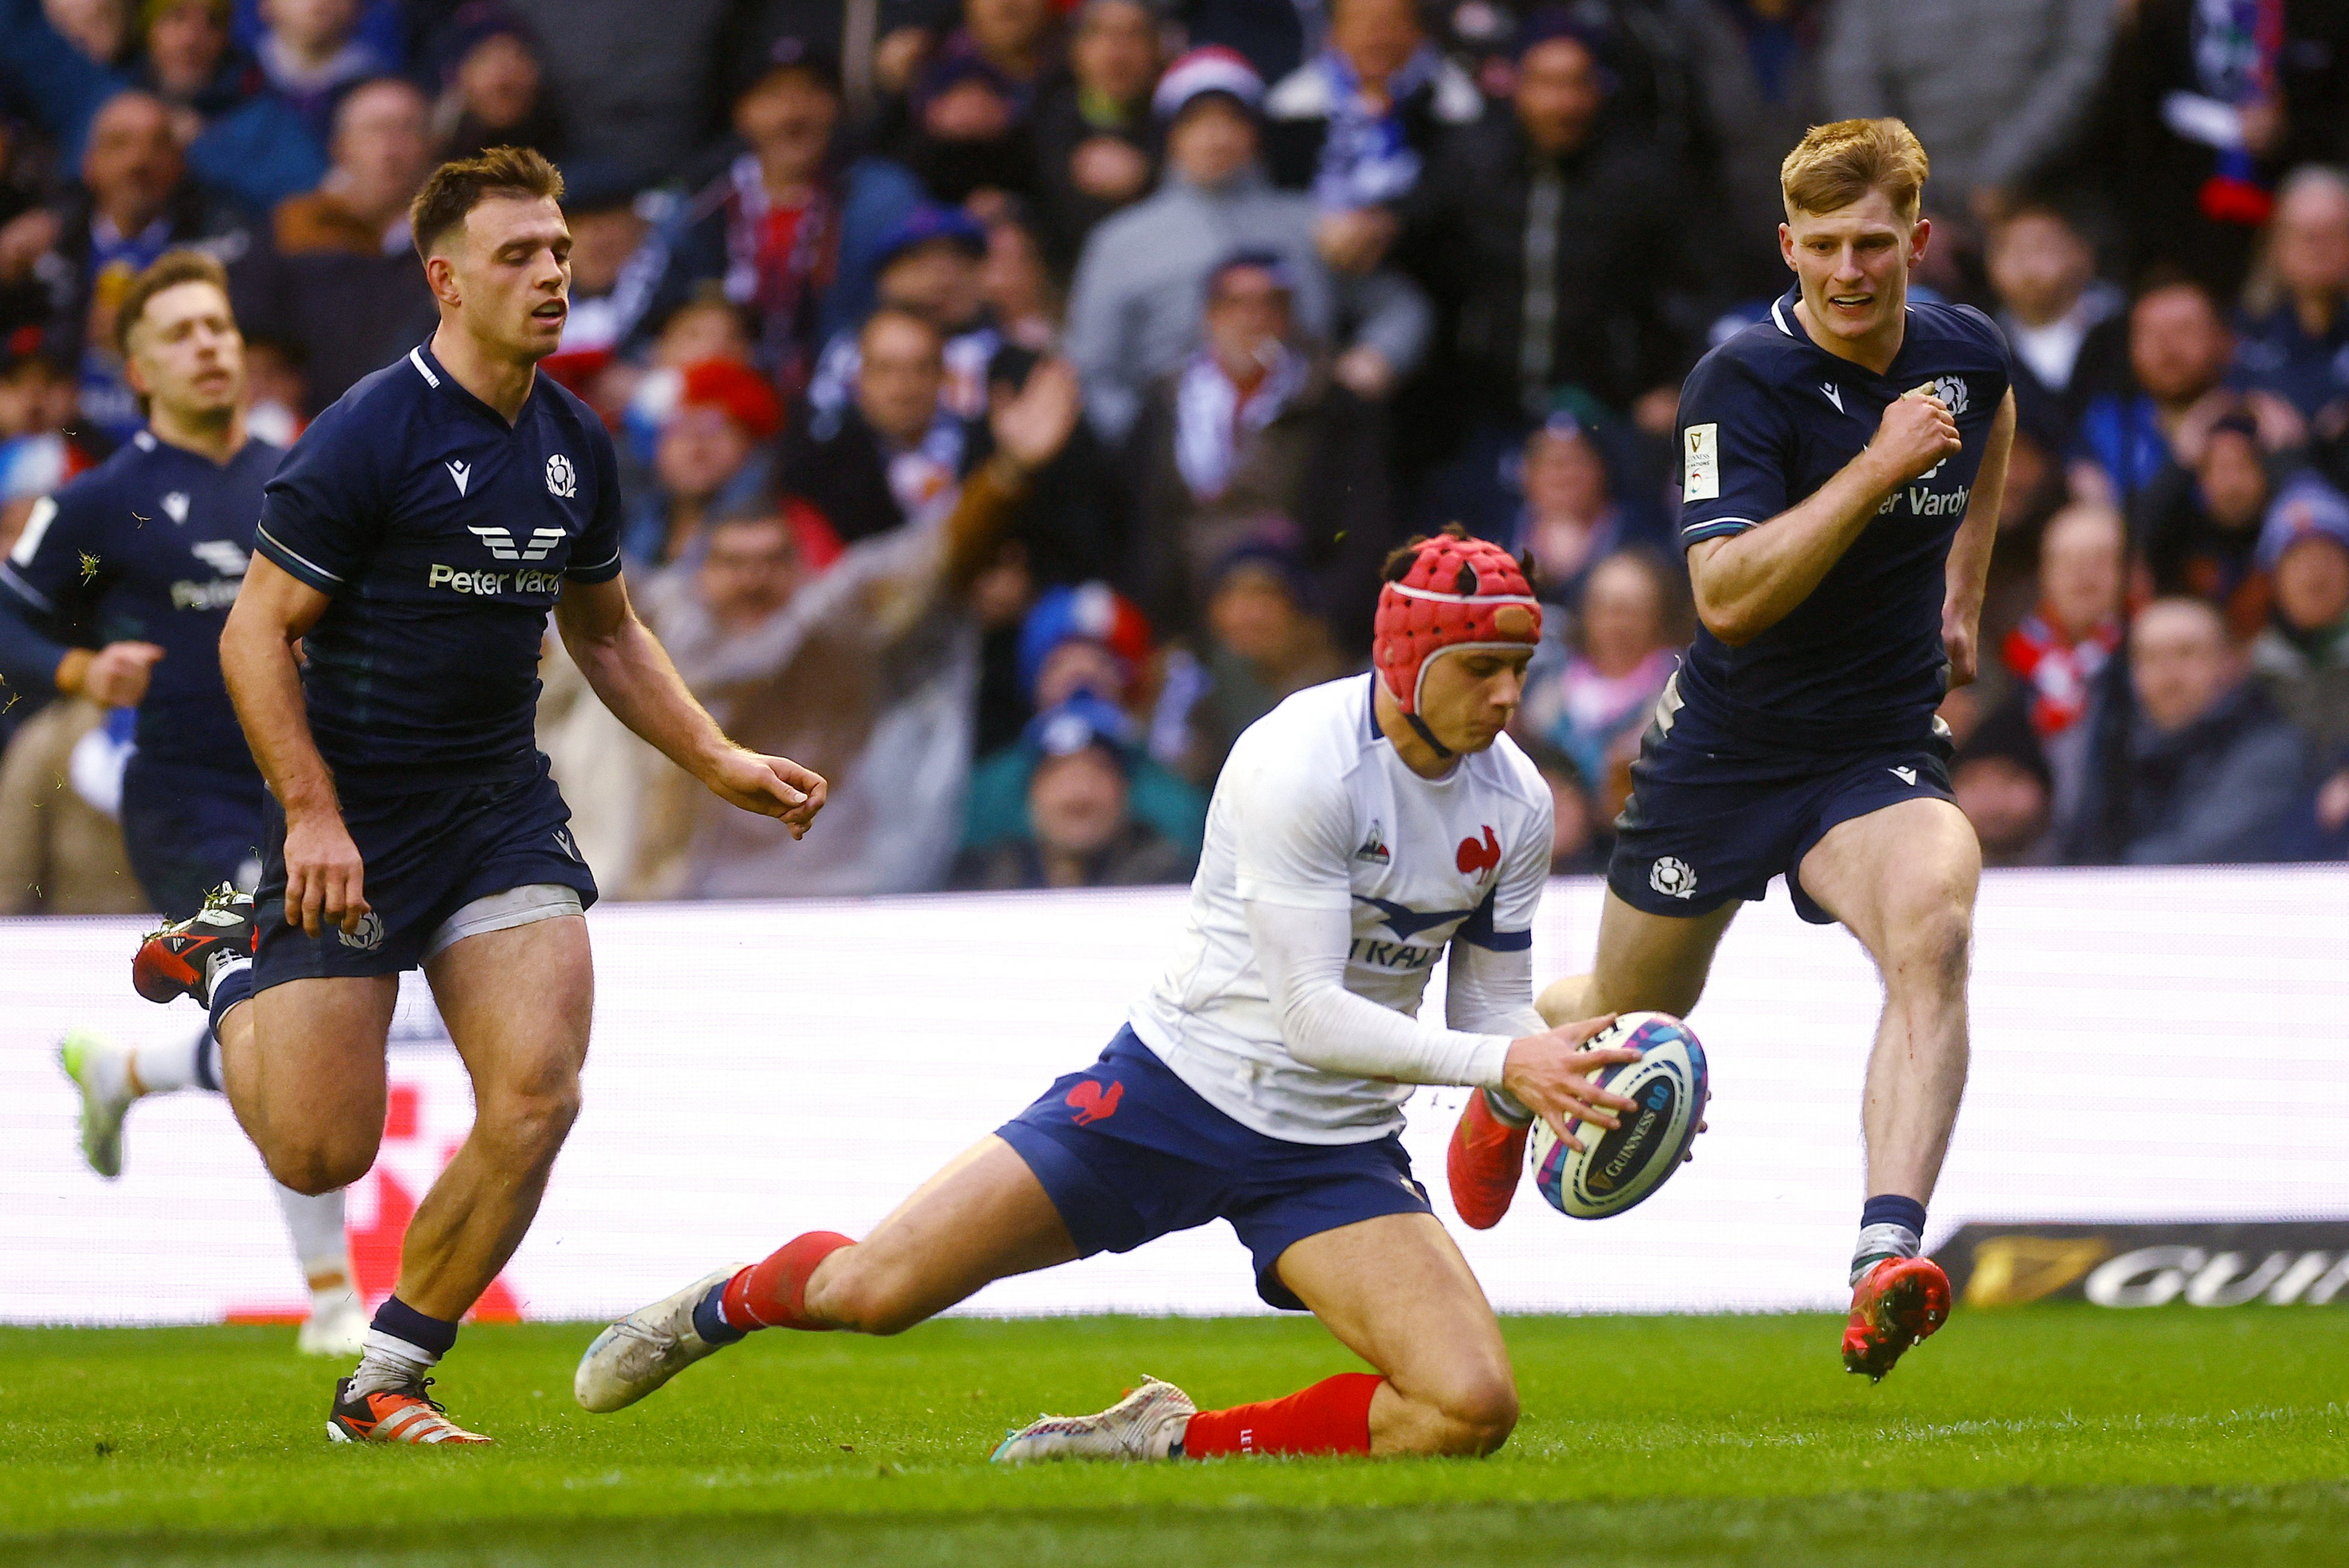 Louis Bielle-Biarrey’s late try helped France to victory